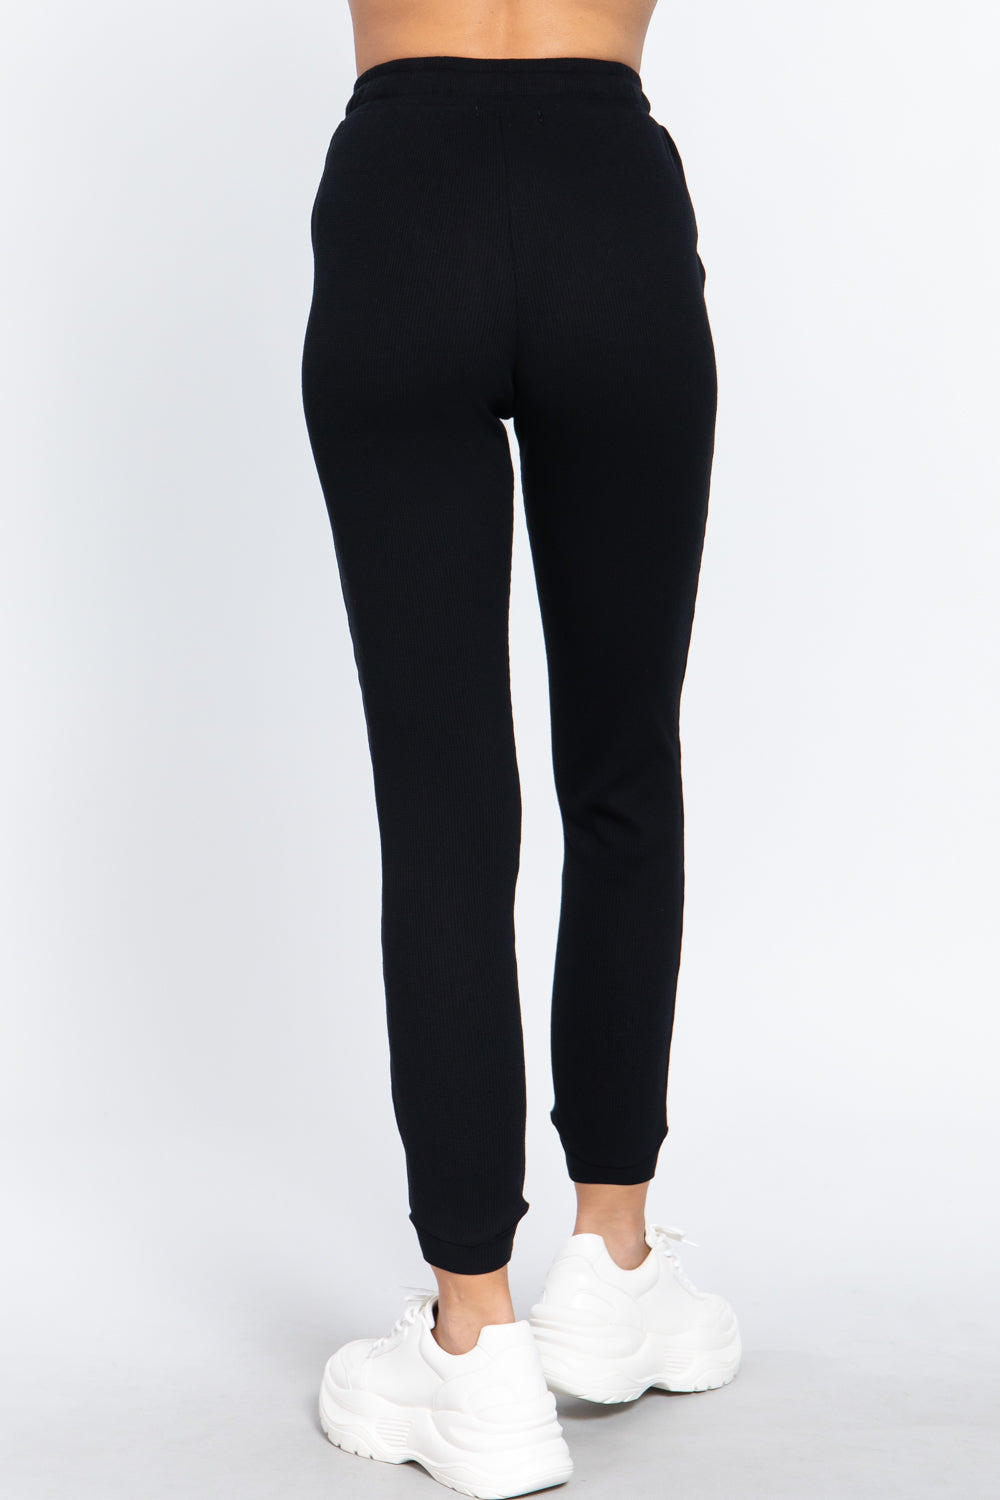 Waistband Side Pocket Thermal Women's Pants